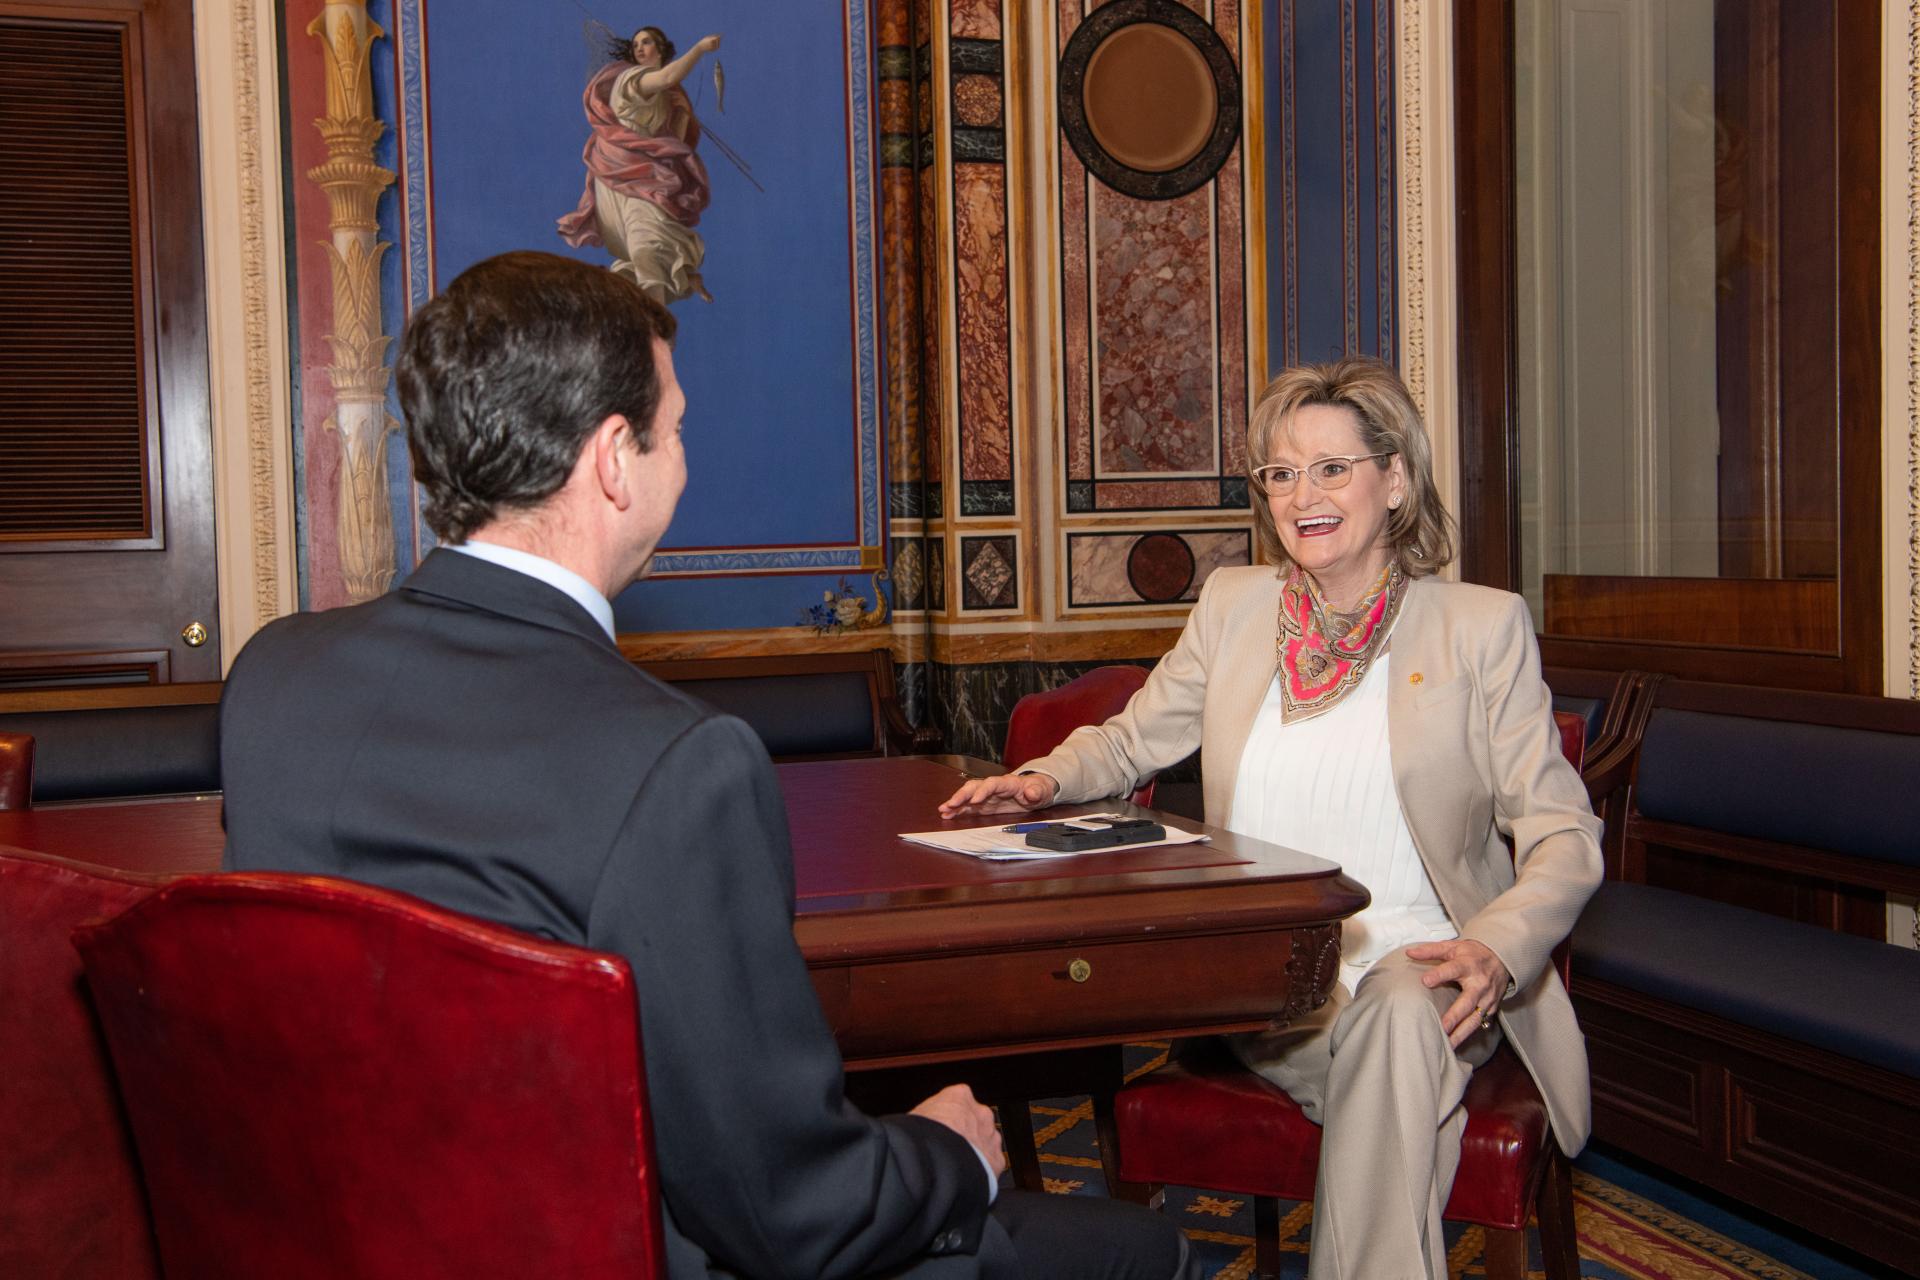 Senator Hyde-Smith, Legislative Branch Appropriations Subcommittee Chairman, meets with Architect of the Capitol, J. Brett Blanton, in the Capitol. (March 10, 2020)